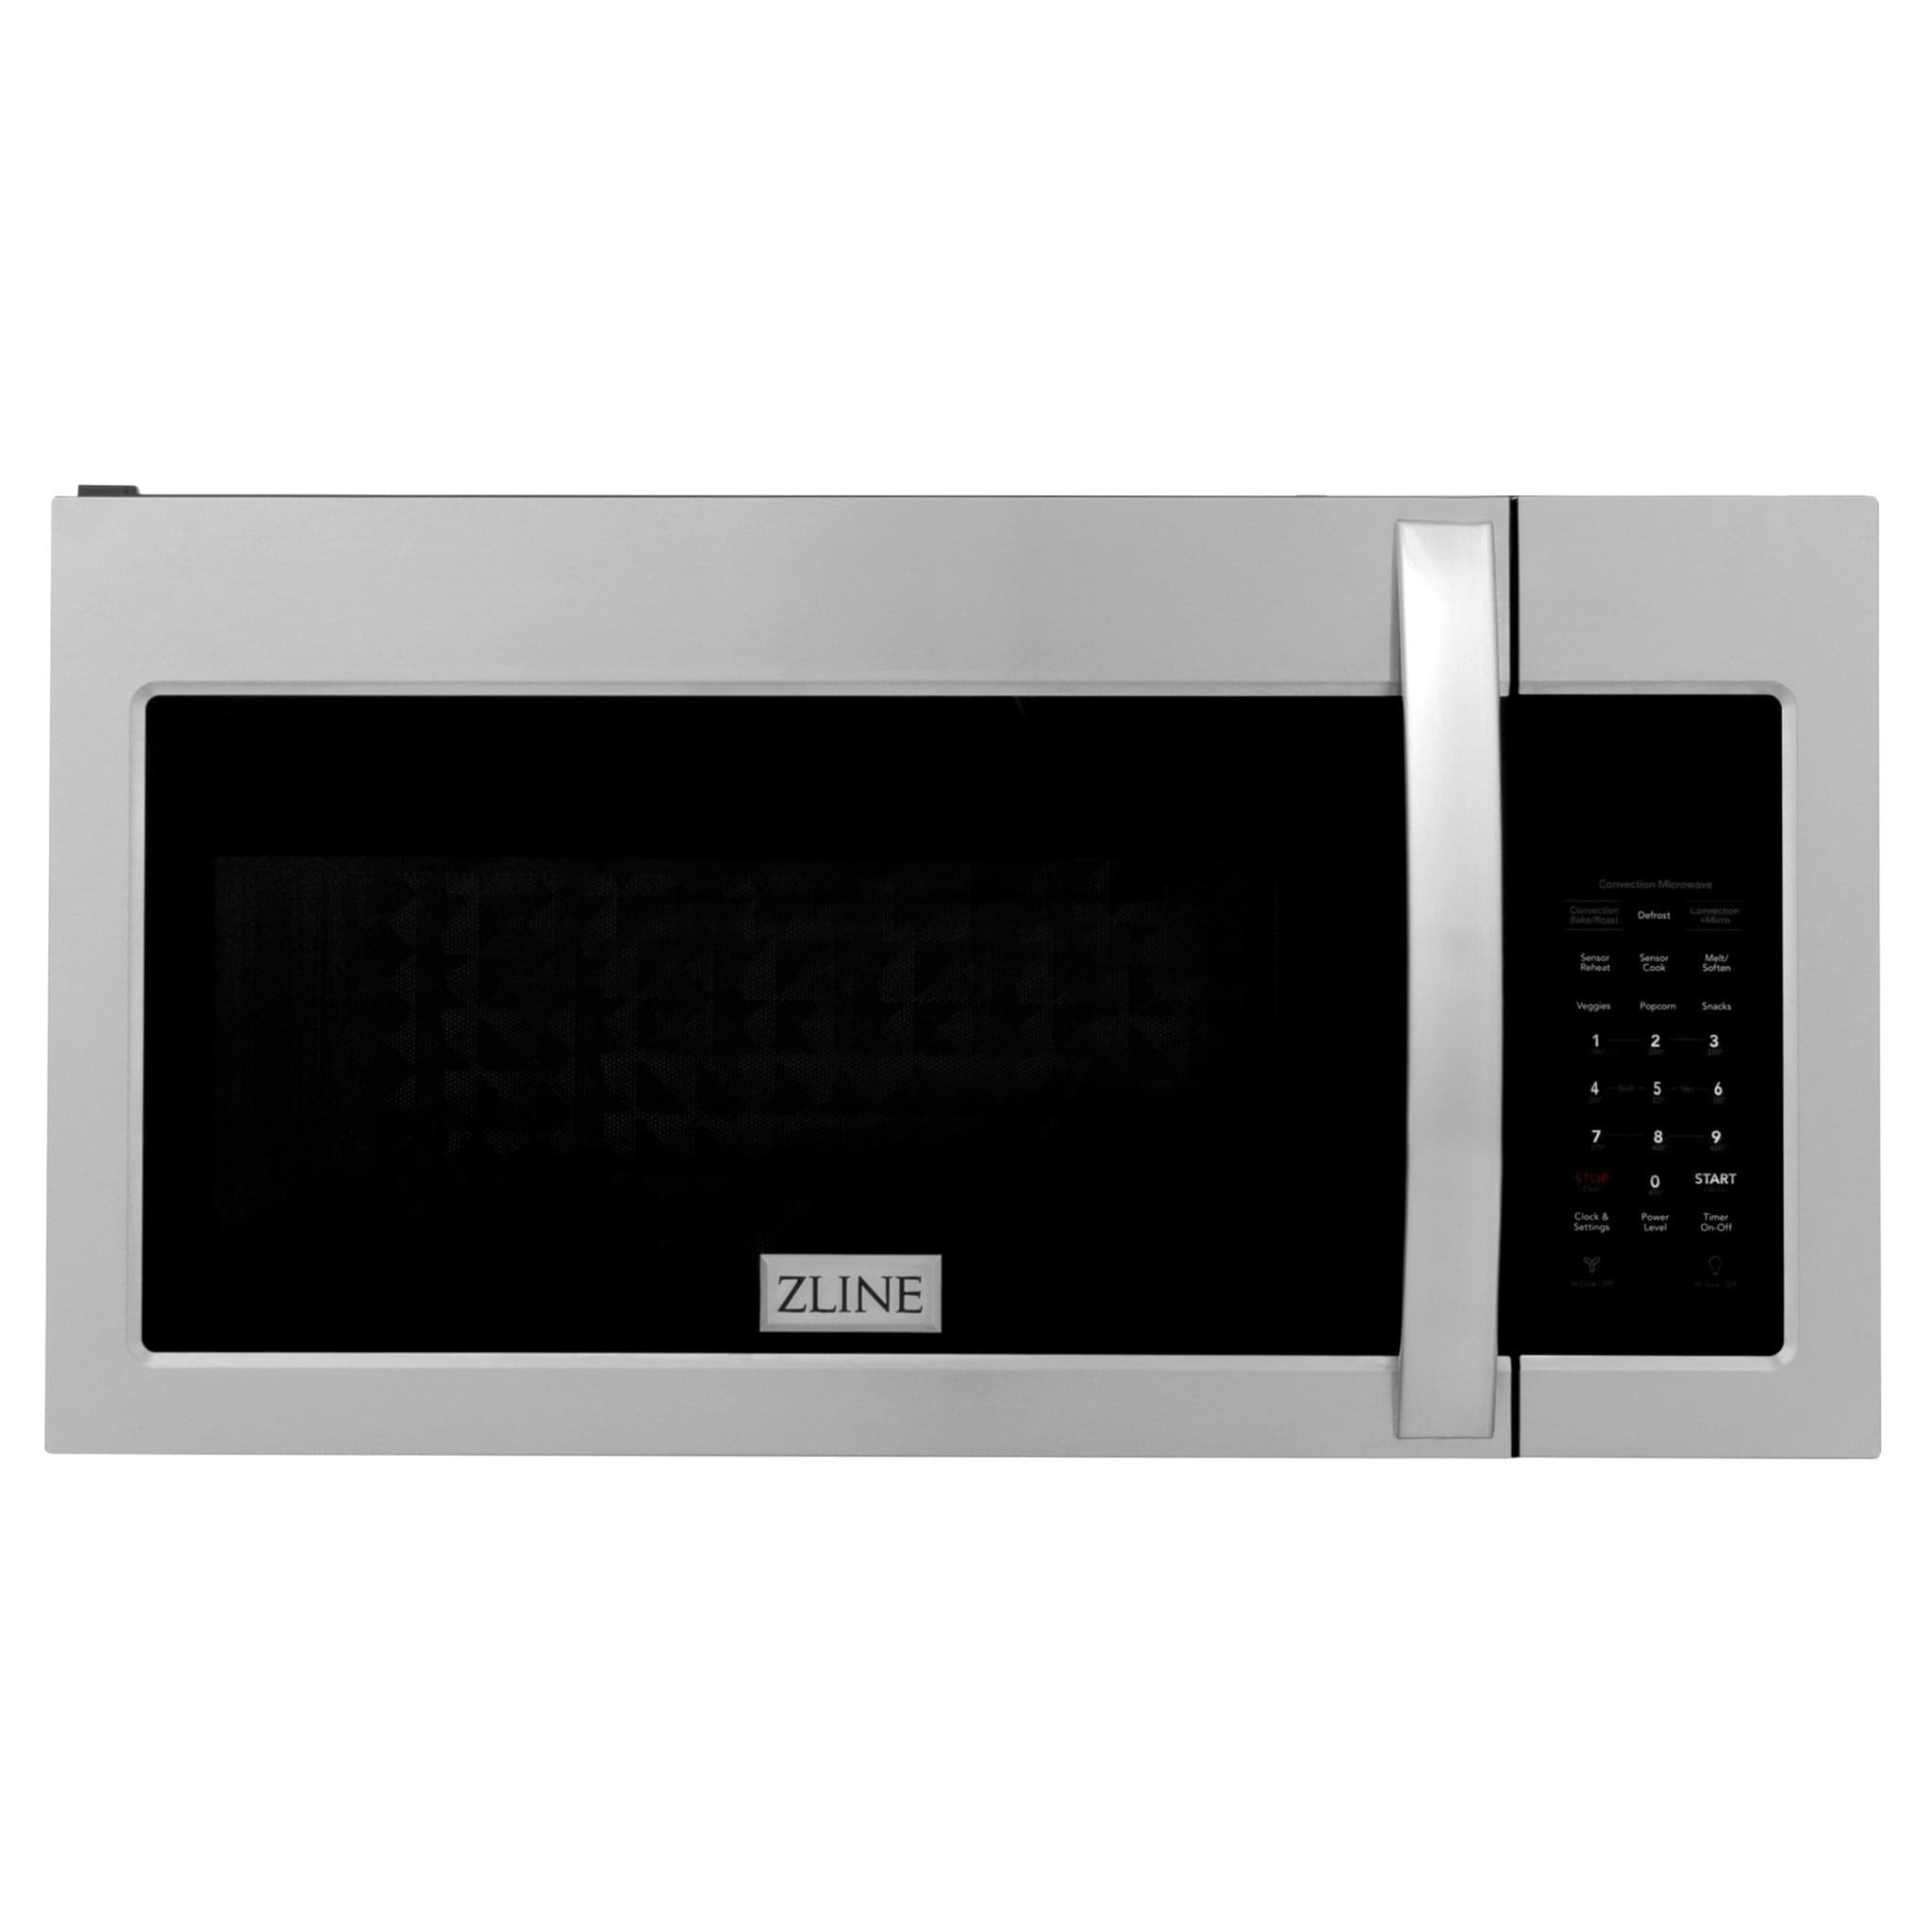 https://ak1.ostkcdn.com/images/products/is/images/direct/20ed551b86b744b87291ed4efdb4ffa8ccc549a8/ZLINE-Over-the-Range-Convection-Microwave-Oven-in-Stainless-Steel-with-Modern-Handle.jpg